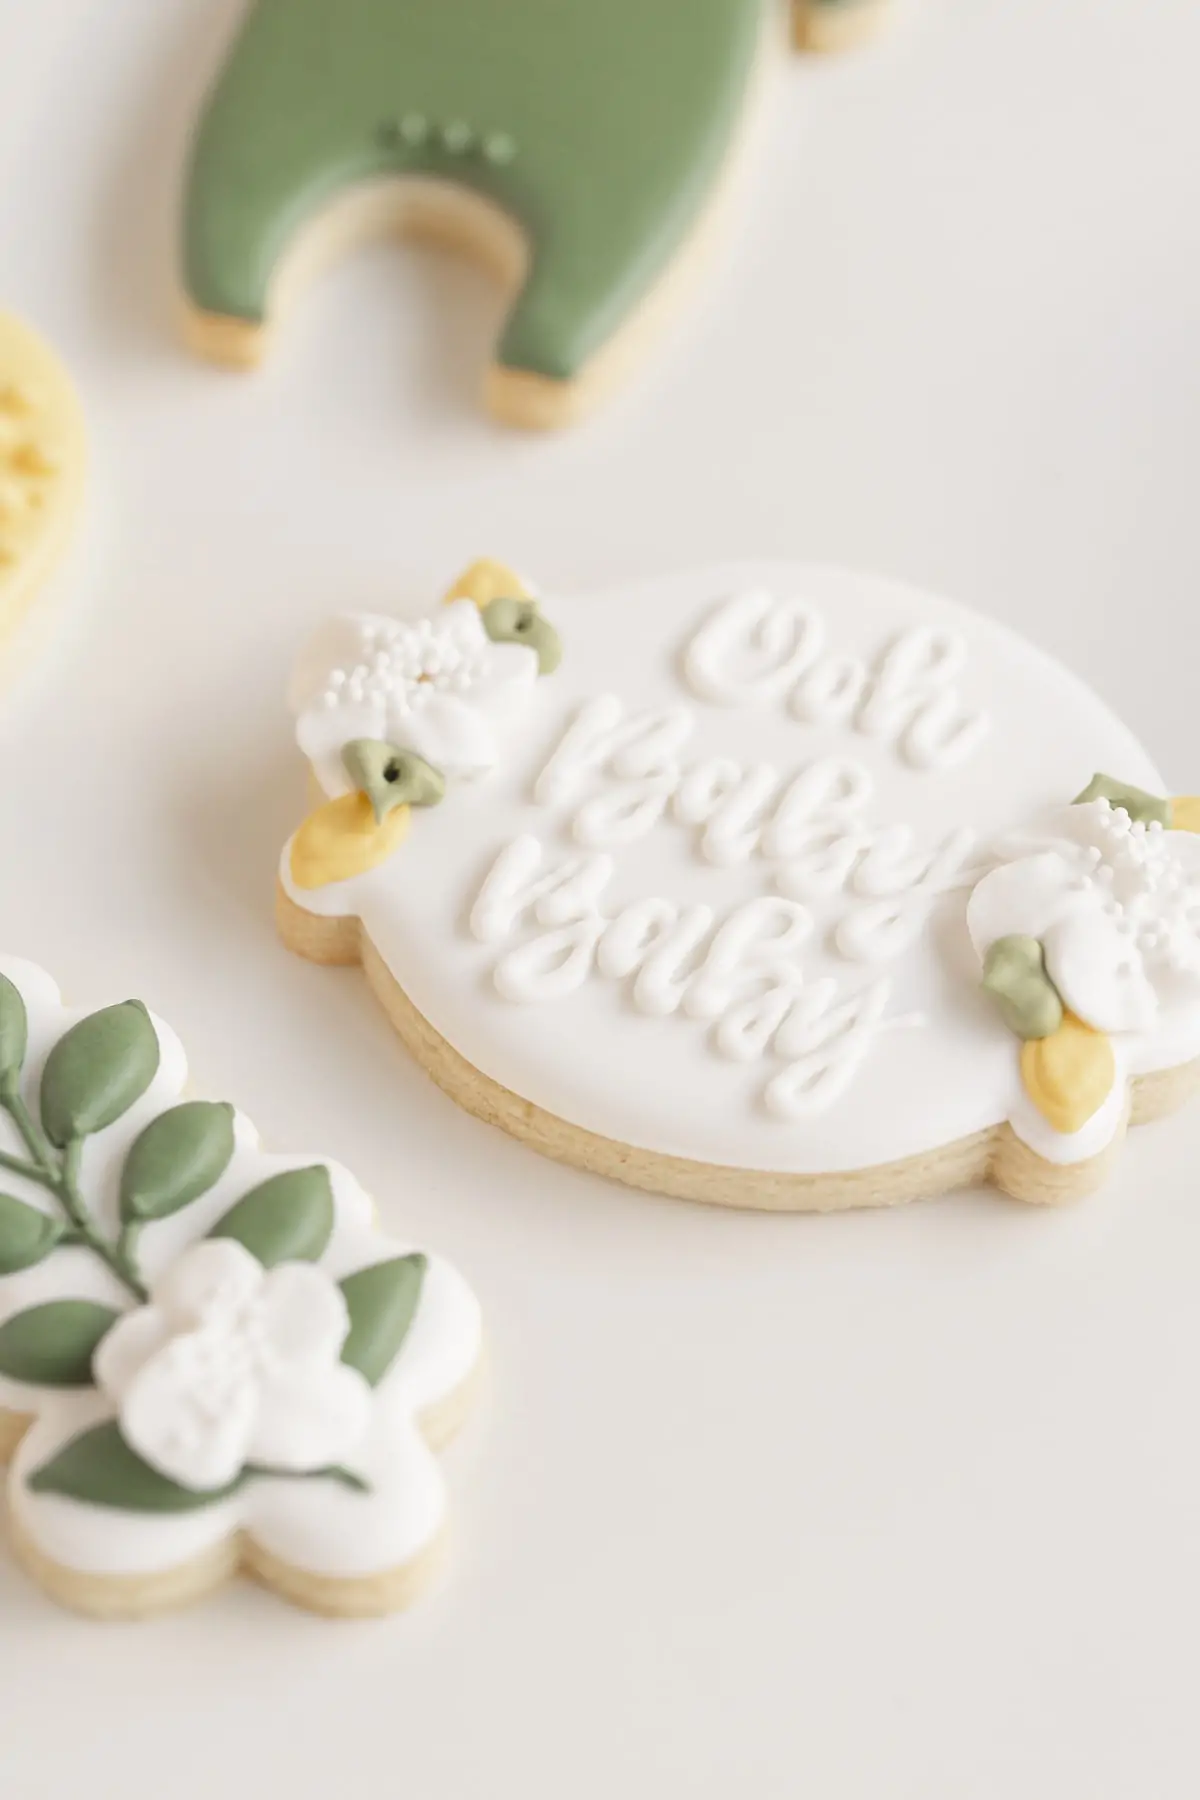 lemon baby shower cookies with "oh baby baby" written on it